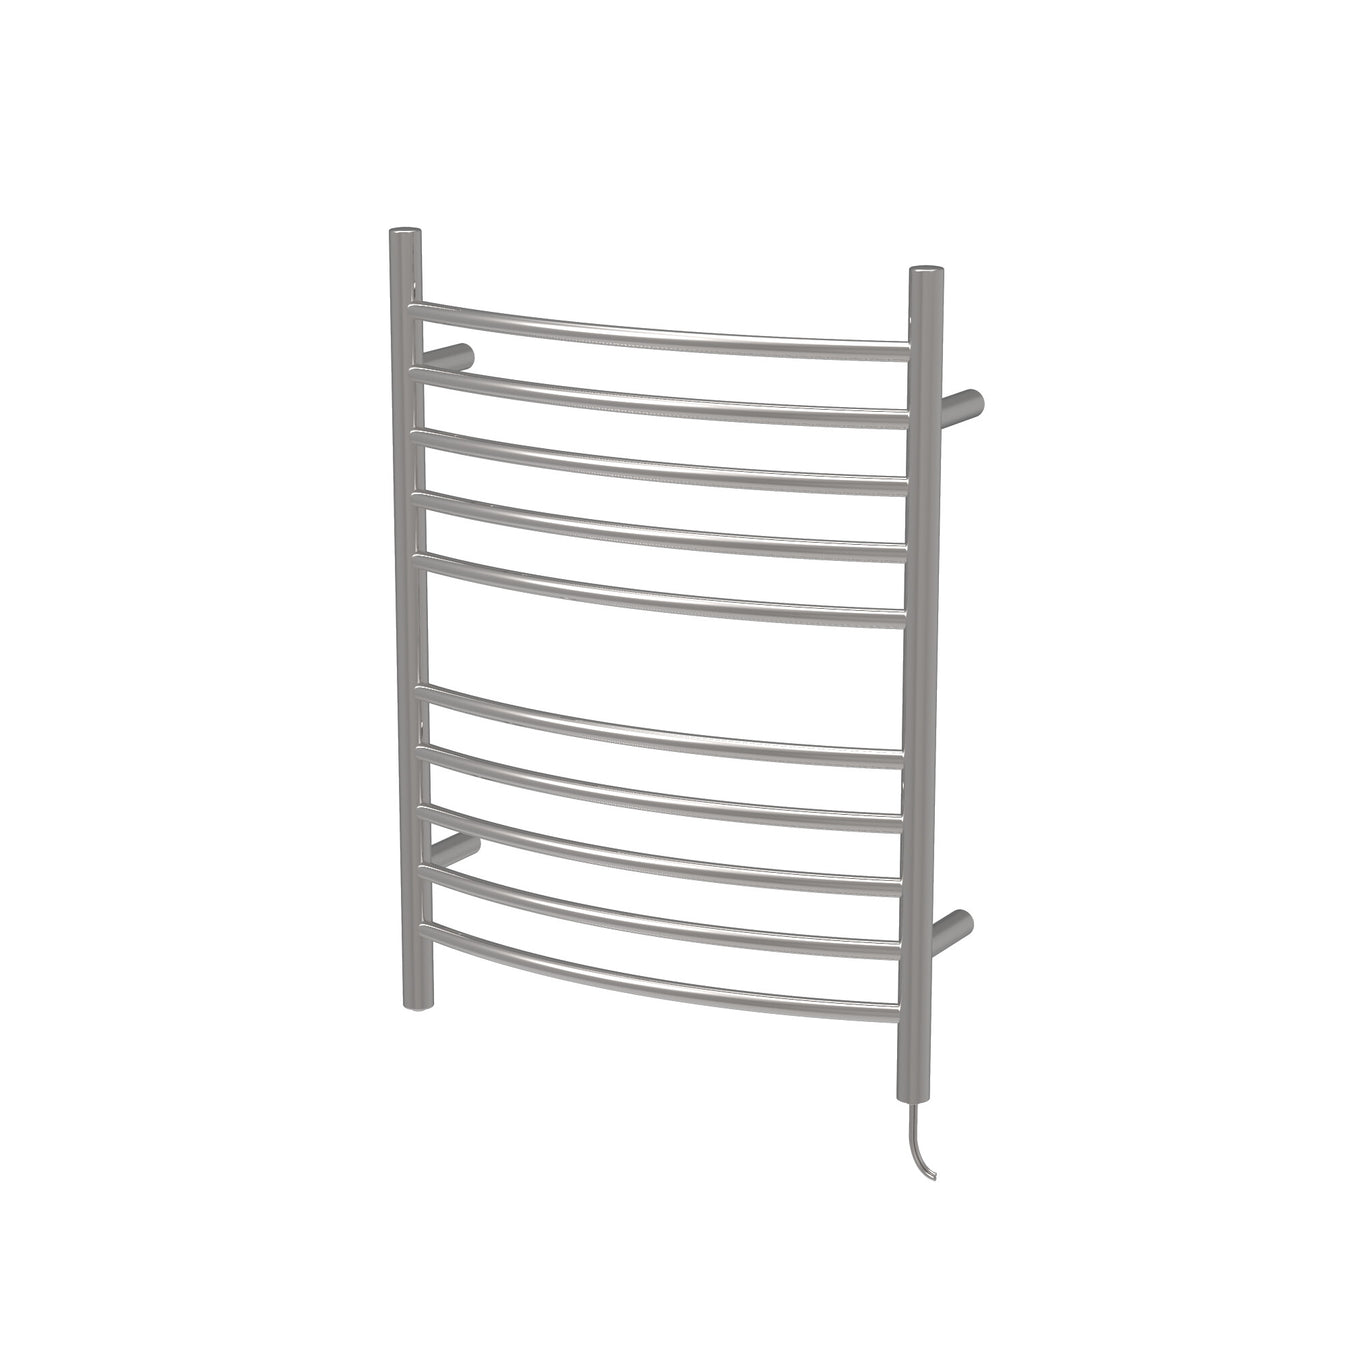 All Curved Bar Towel Warmers